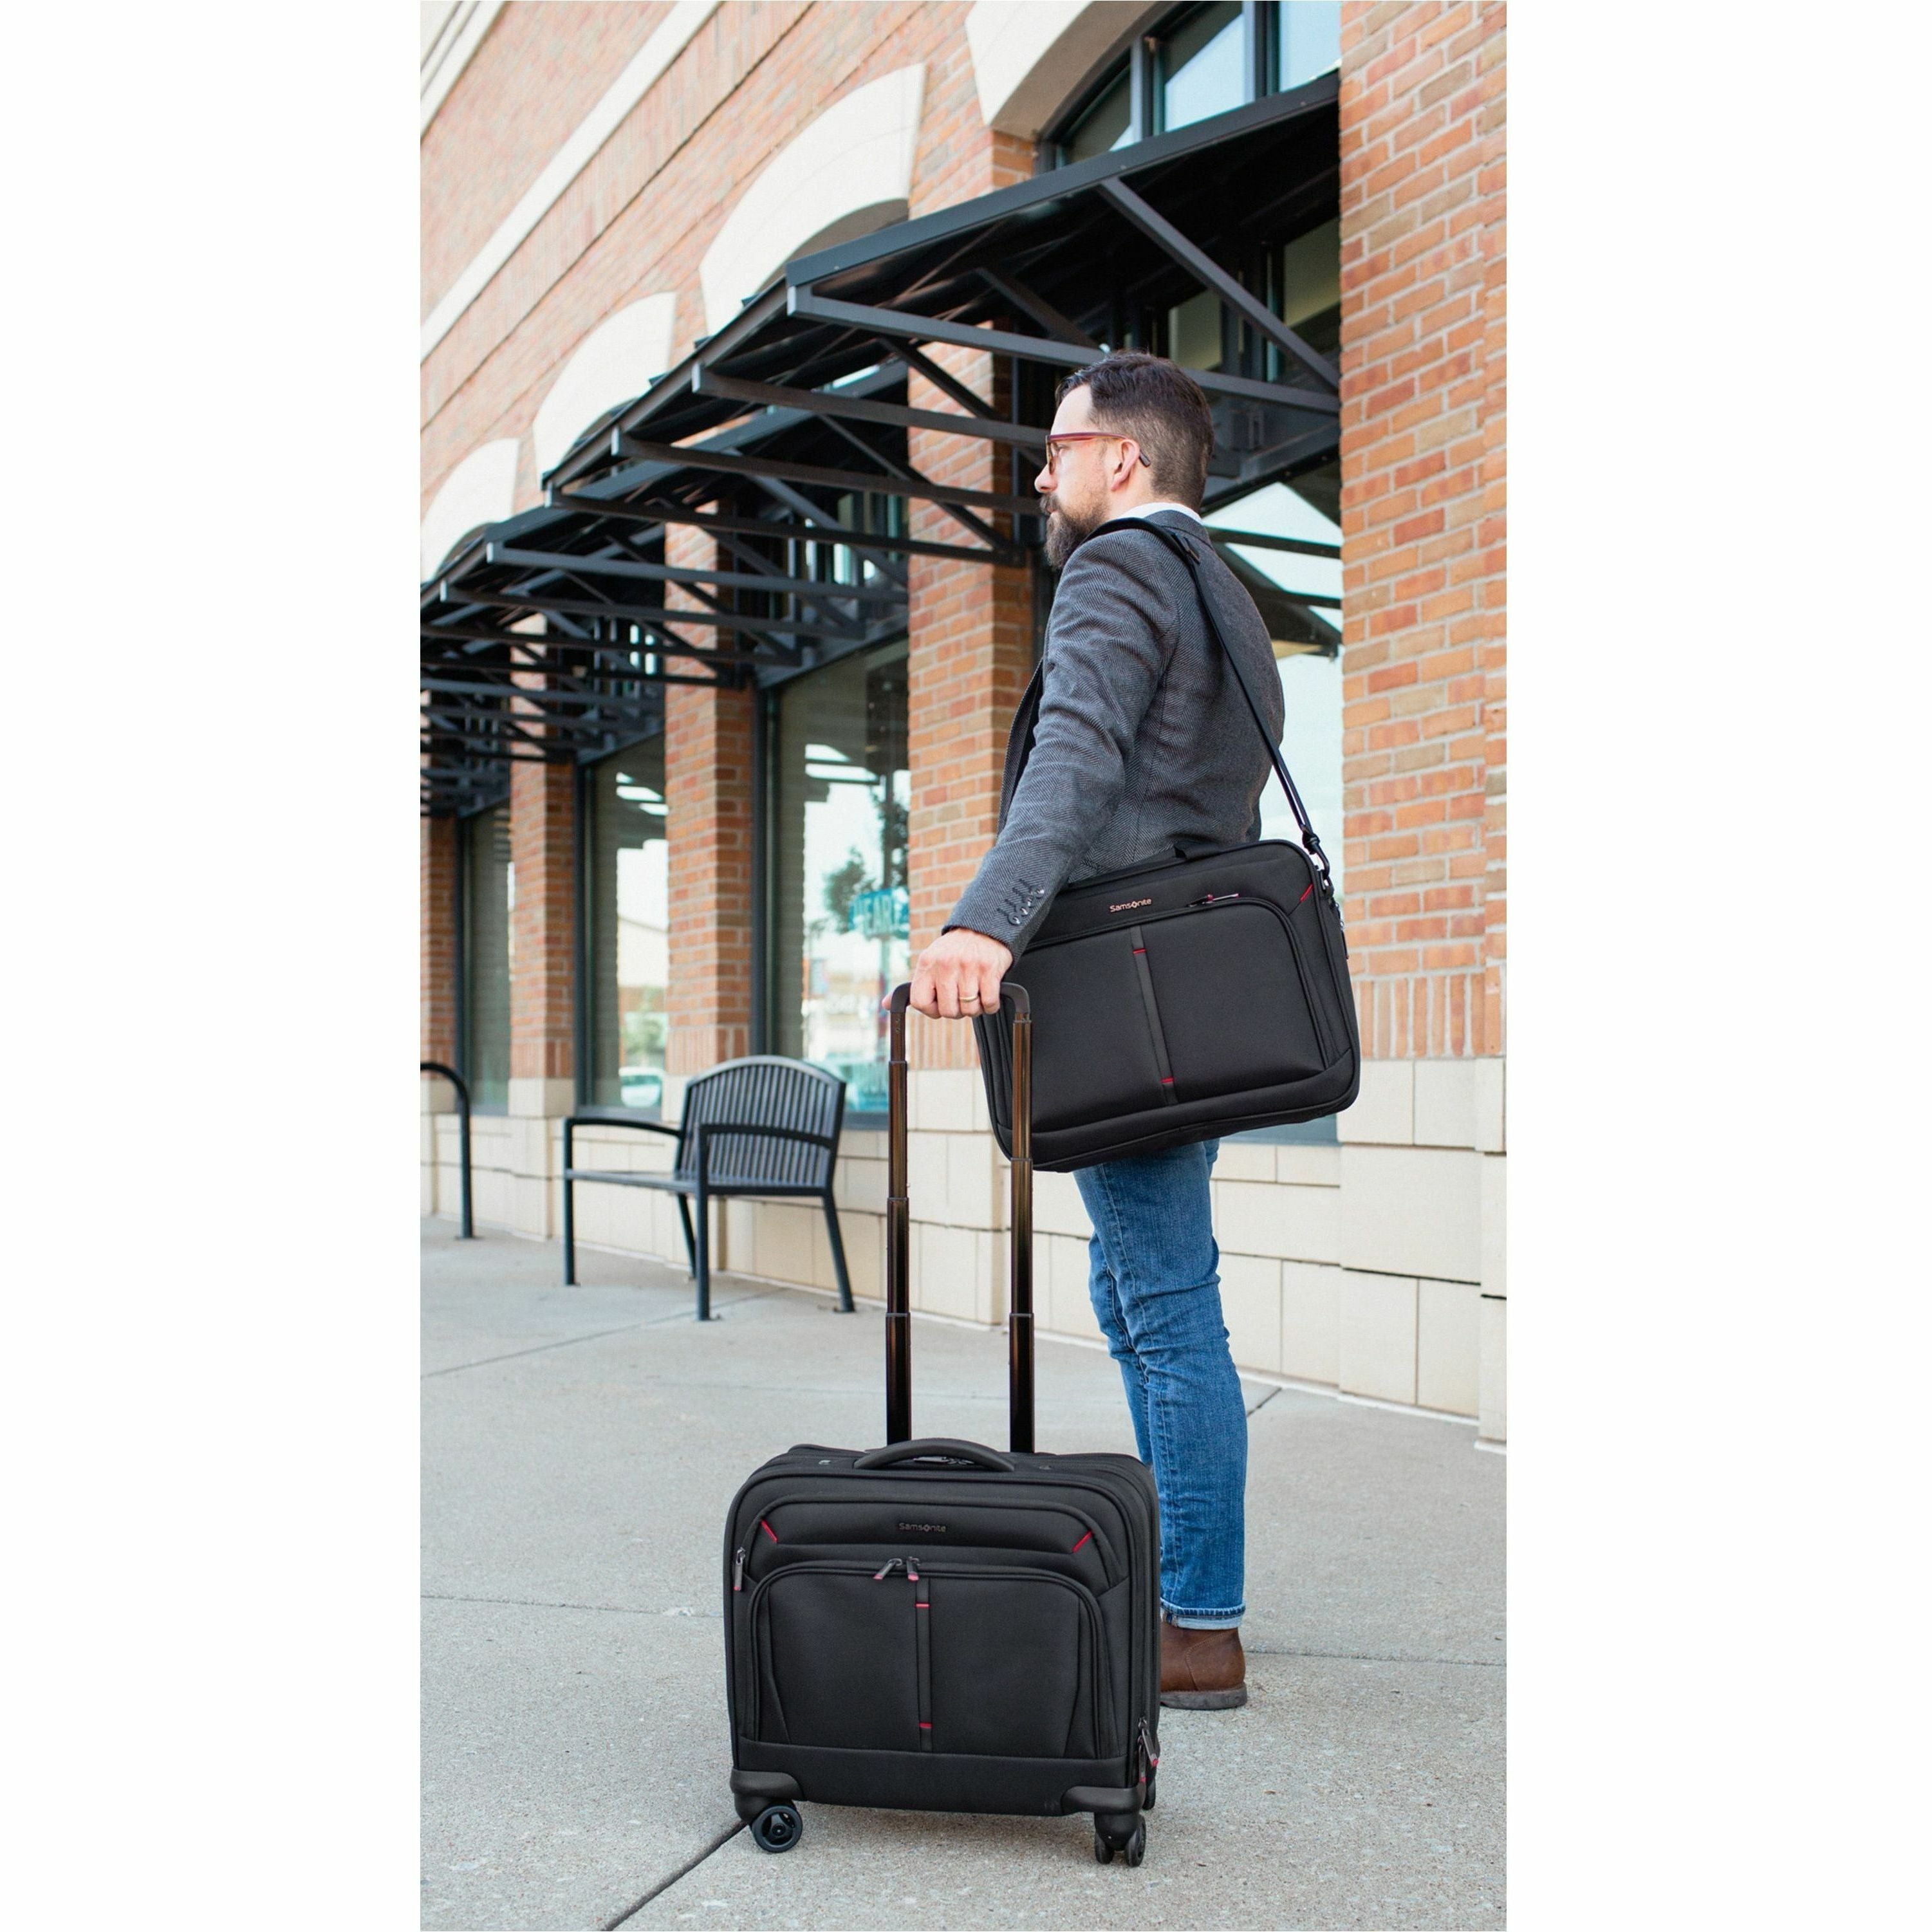 samsonite-xenon-40-carrying-case-briefcase-for-129-to-156-notebook-tablet-travel-electronics-black-1680d-ballistic-polyester-tricot-body-trolley-strap-55-height-x-125-width-x-17-depth-1-each_sml1473271041 - 4